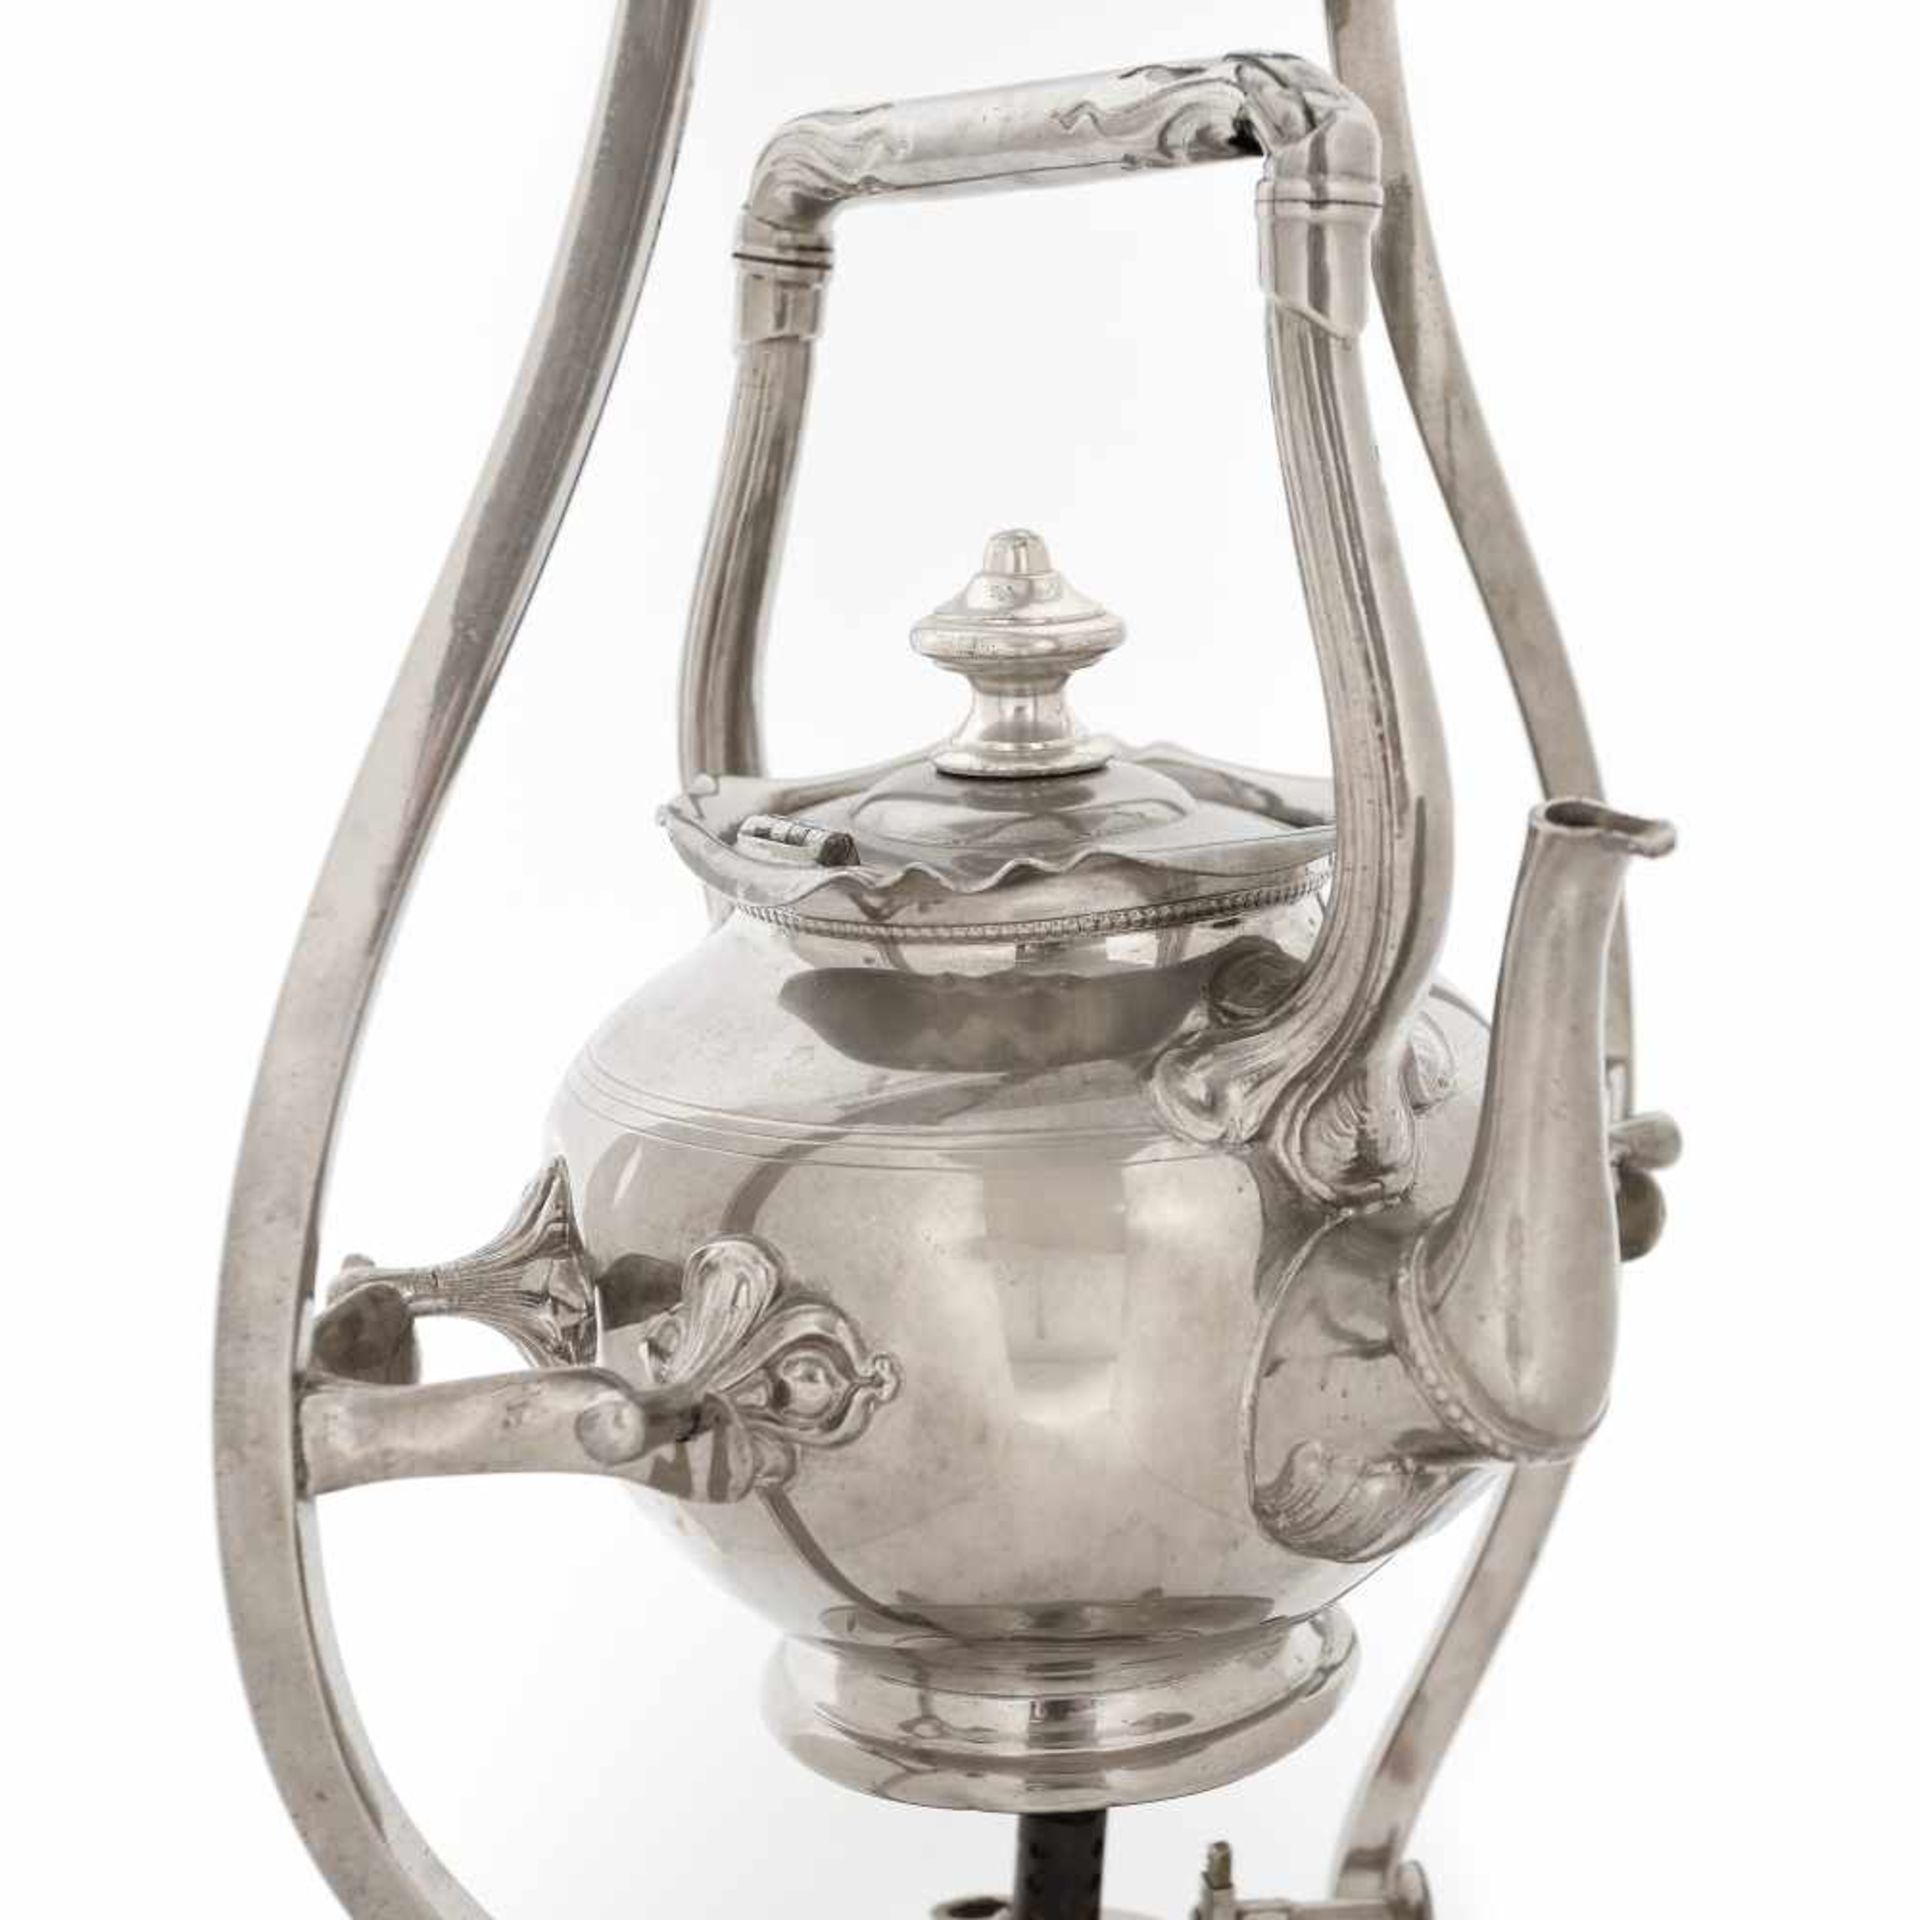 Teapot with spirit lamp, J.N.Daalderop brand, Art Deco style, approx. 1920-1949 - Image 3 of 3